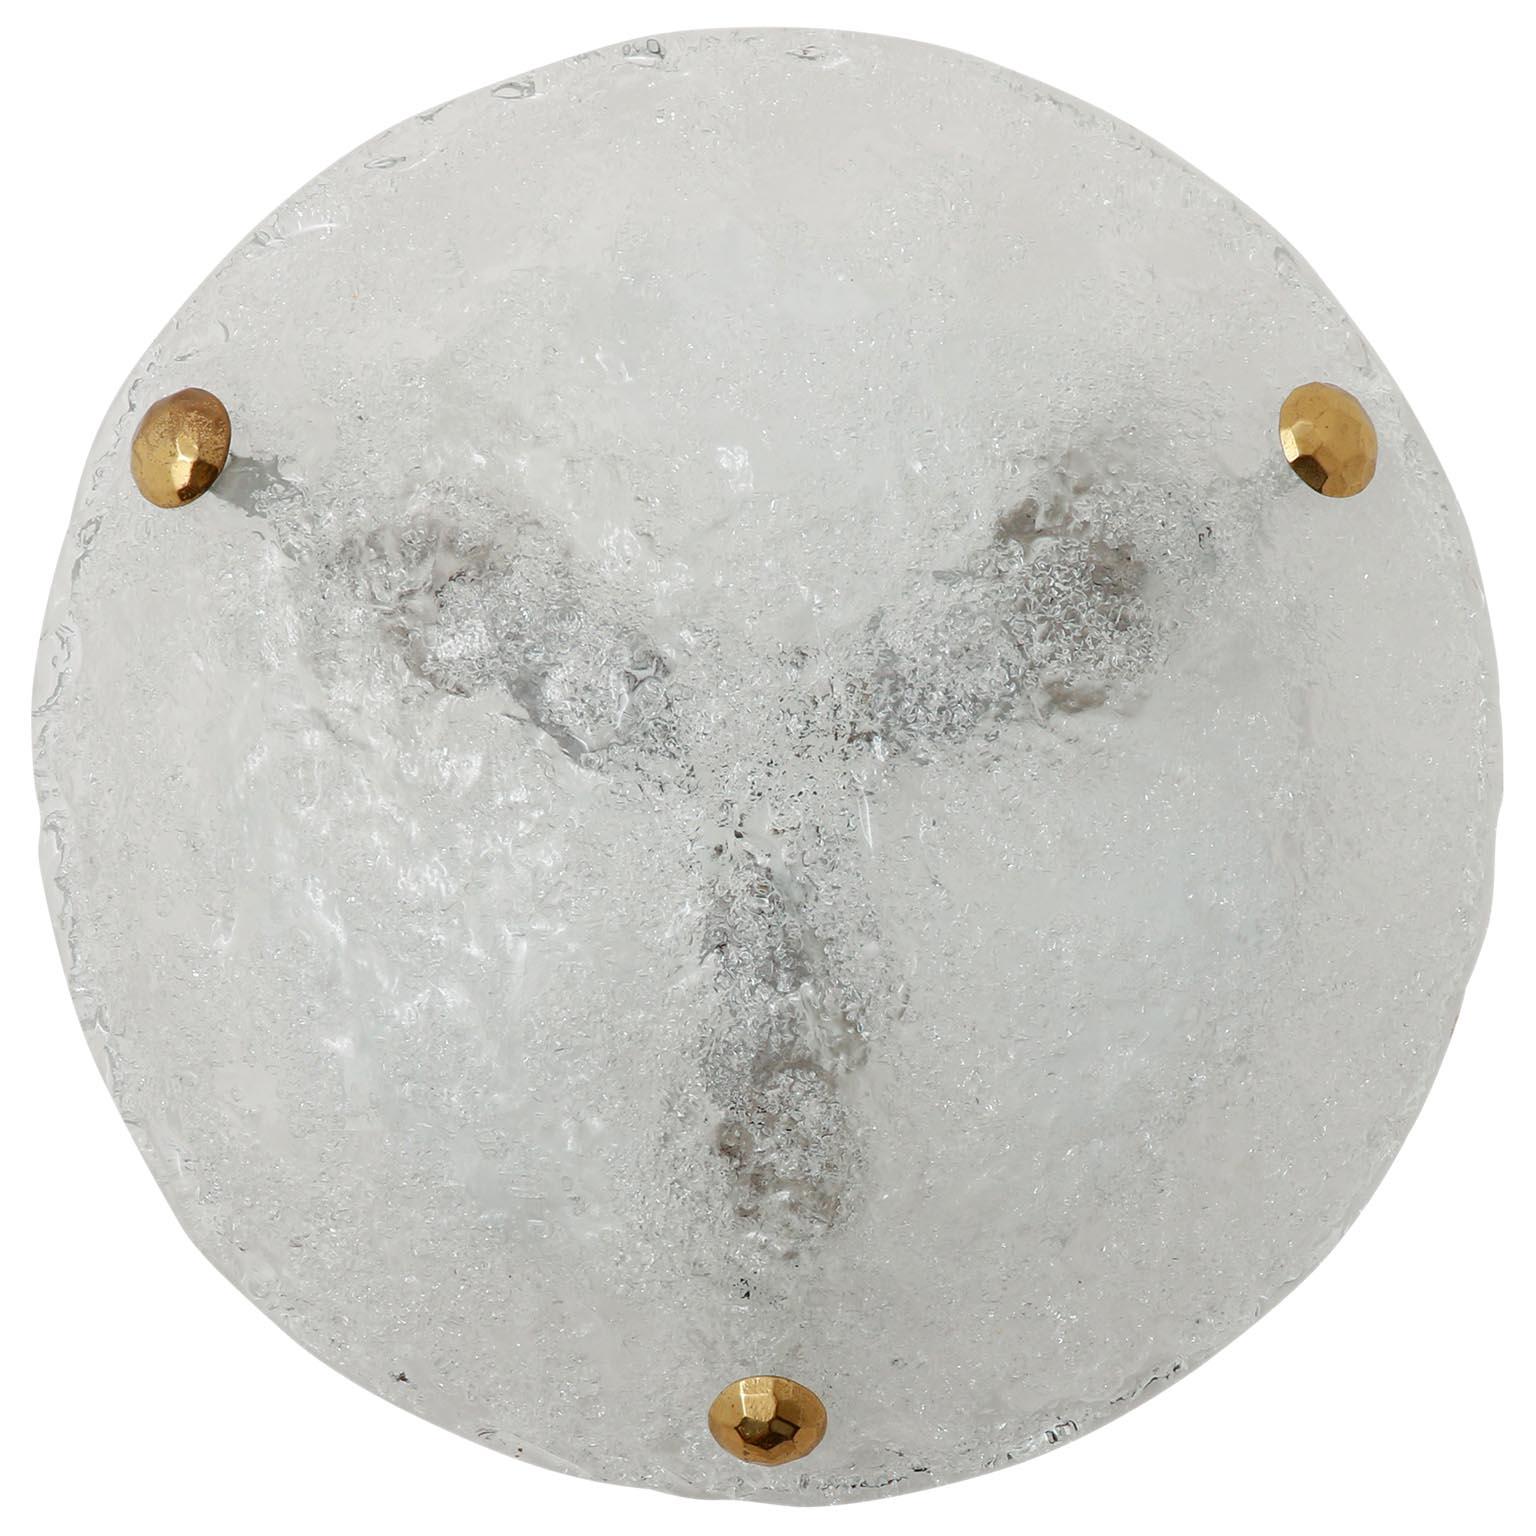 One of two round ice glass light fixtures by Hillebrand, Germany, manufactured in midcentury, circa 1970 (late 1960s or early 1970s). 
A textured and clear glass with an icy structure is mounted with three large brass bolts on a white enameled metal